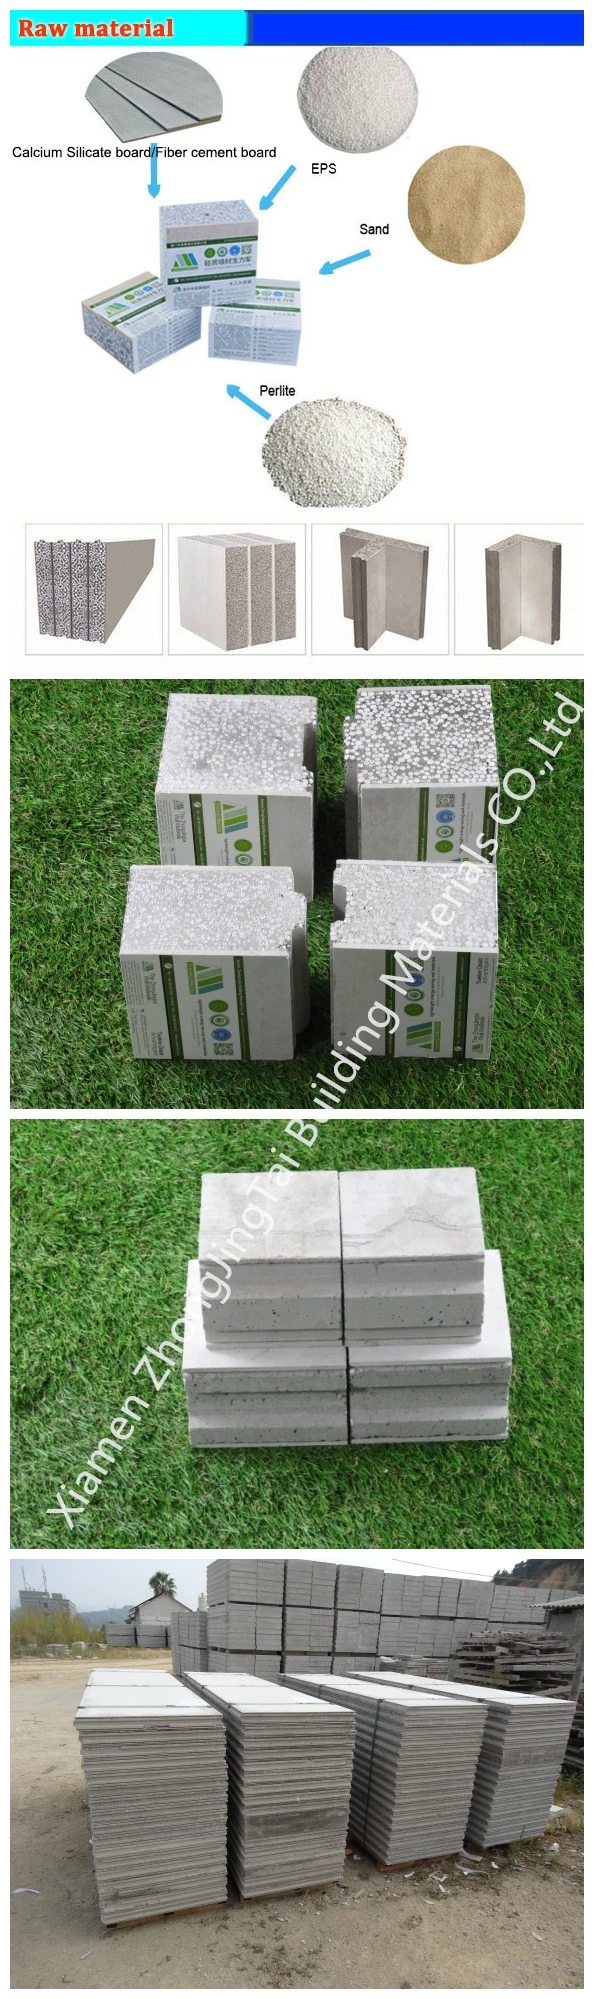 Thermal/Fire/Water/Moisture/Sound Proof Composite EPS Cement Sandwich Wall Panel for Roof/Wall/Floor